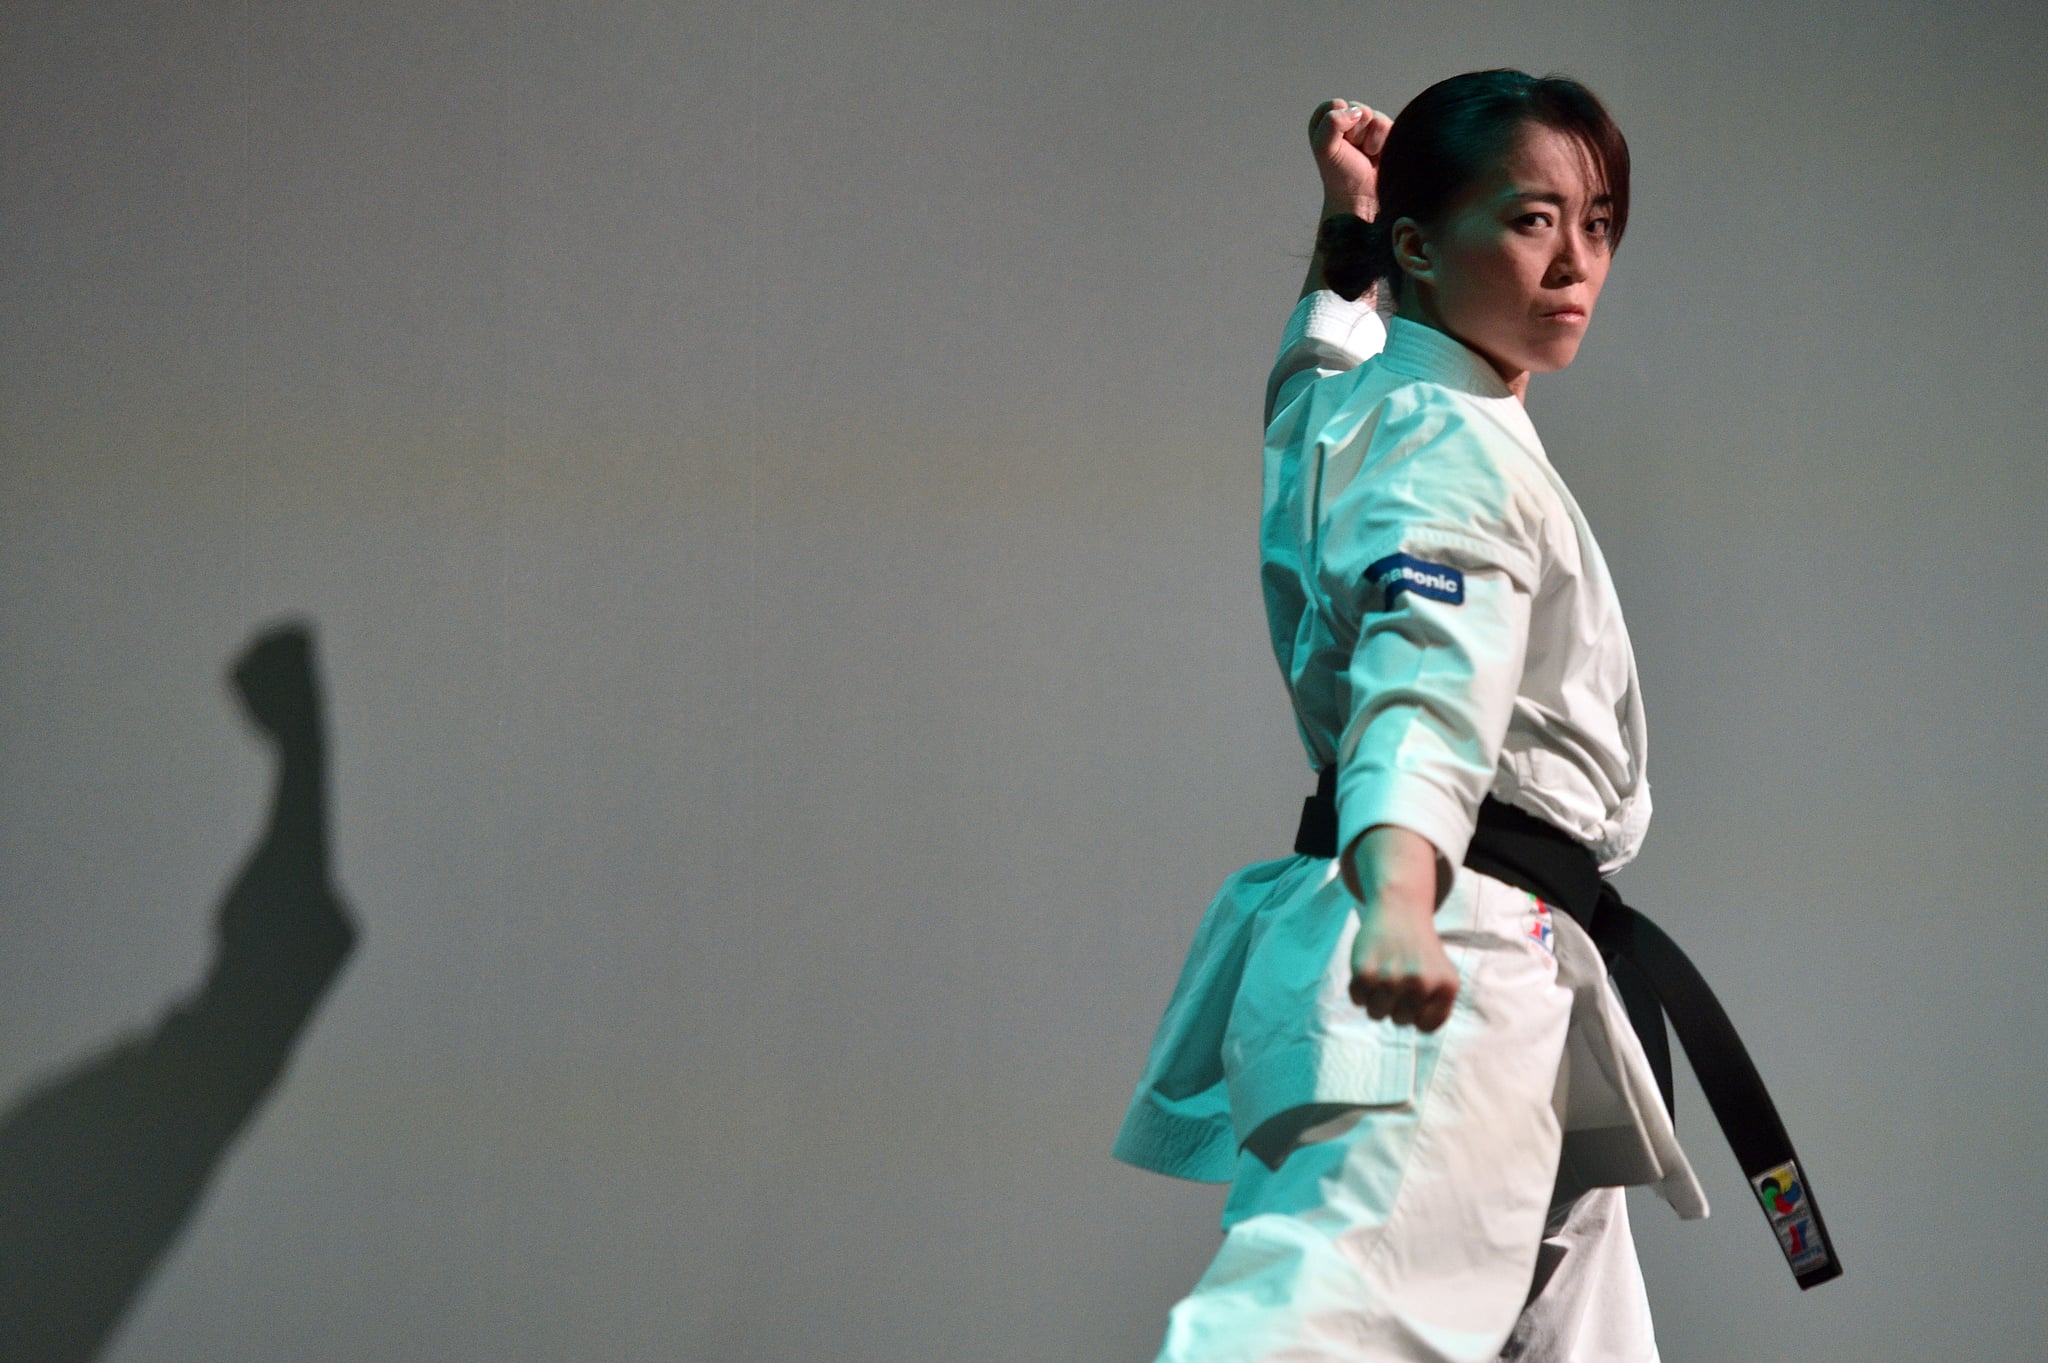 LAS VEGAS, NEVADA - JANUARY 06: Martial artist Sakura Kokumai performs during a Panasonic press event for CES 2020 at the Mandalay Bay Convention Center on January 6, 2020 in Las Vegas, Nevada. CES, the world's largest annual consumer technology trade show, runs January 7-10 and features about 4,500 exhibitors showing off their latest products and services to more than 170,000 attendees. (Photo by David Becker/Getty Images)